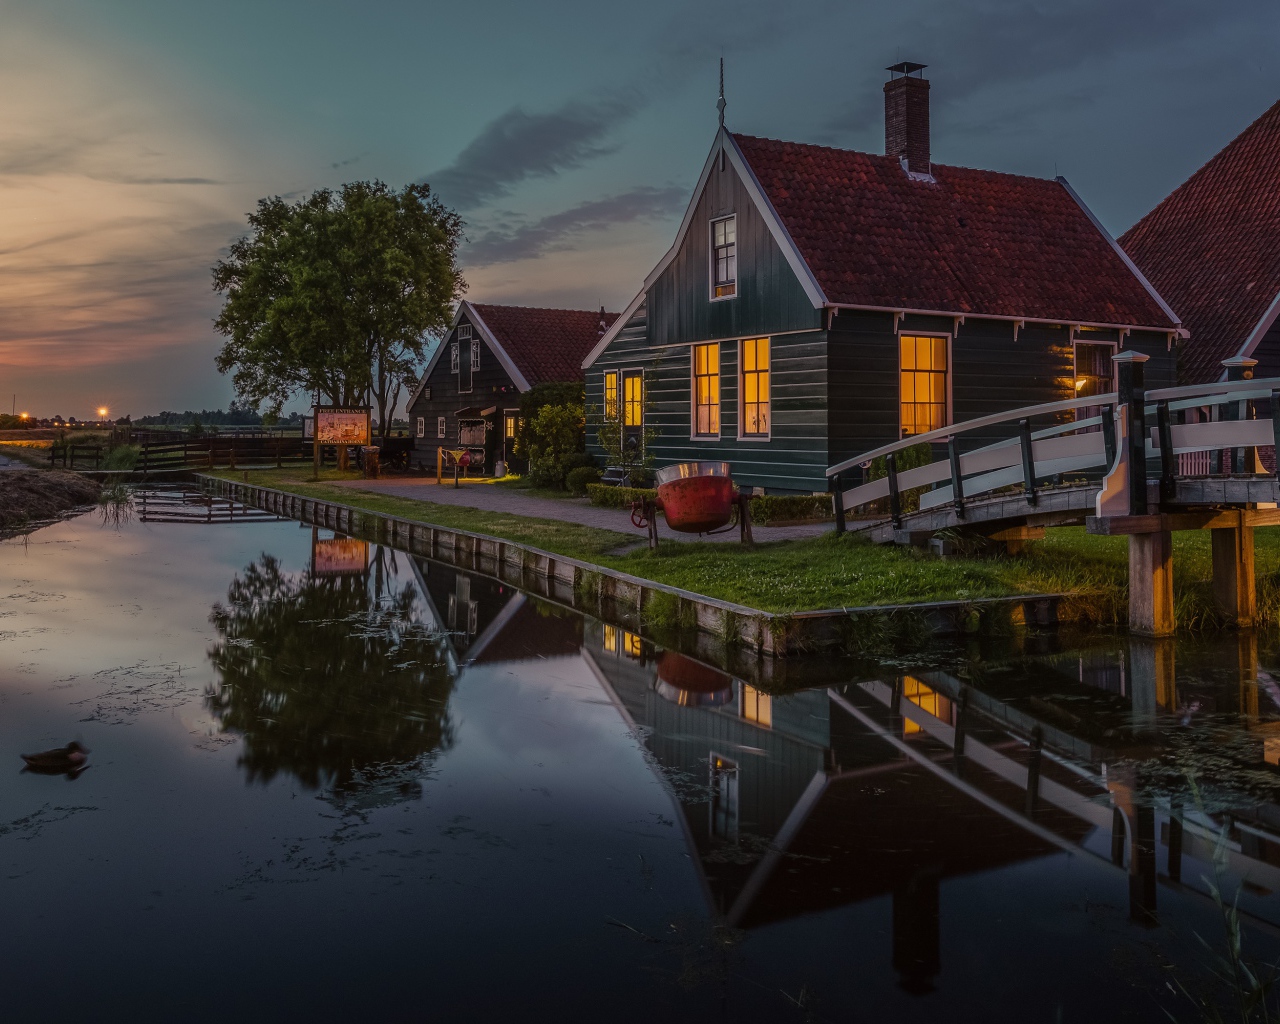 Small houses by the pond in the evening